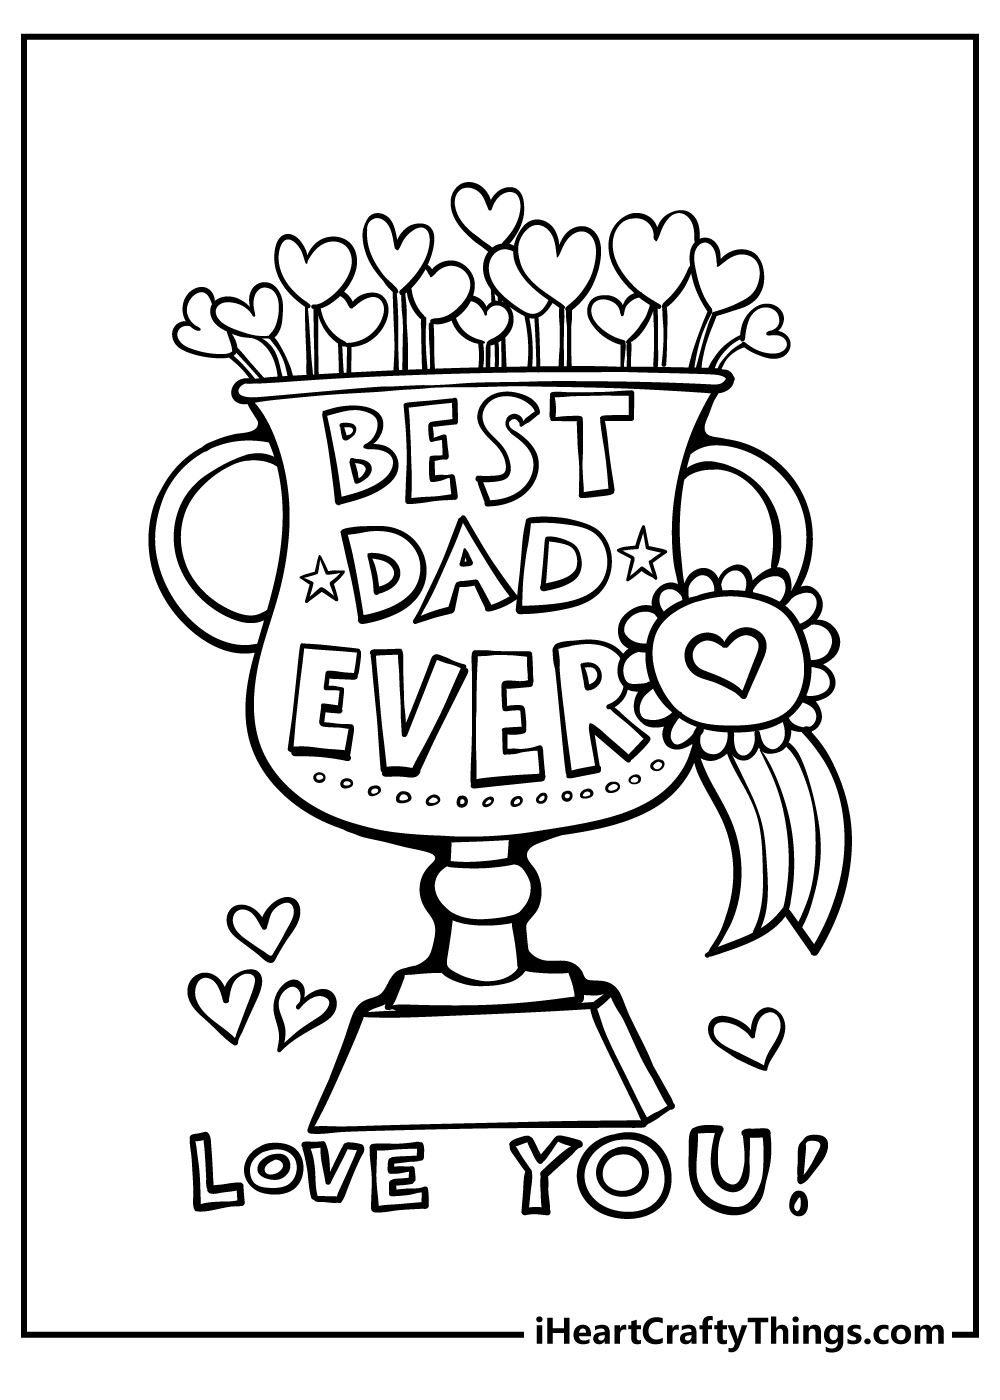 Free Printable Fathers Day Coloring Pages Free Printable Templates